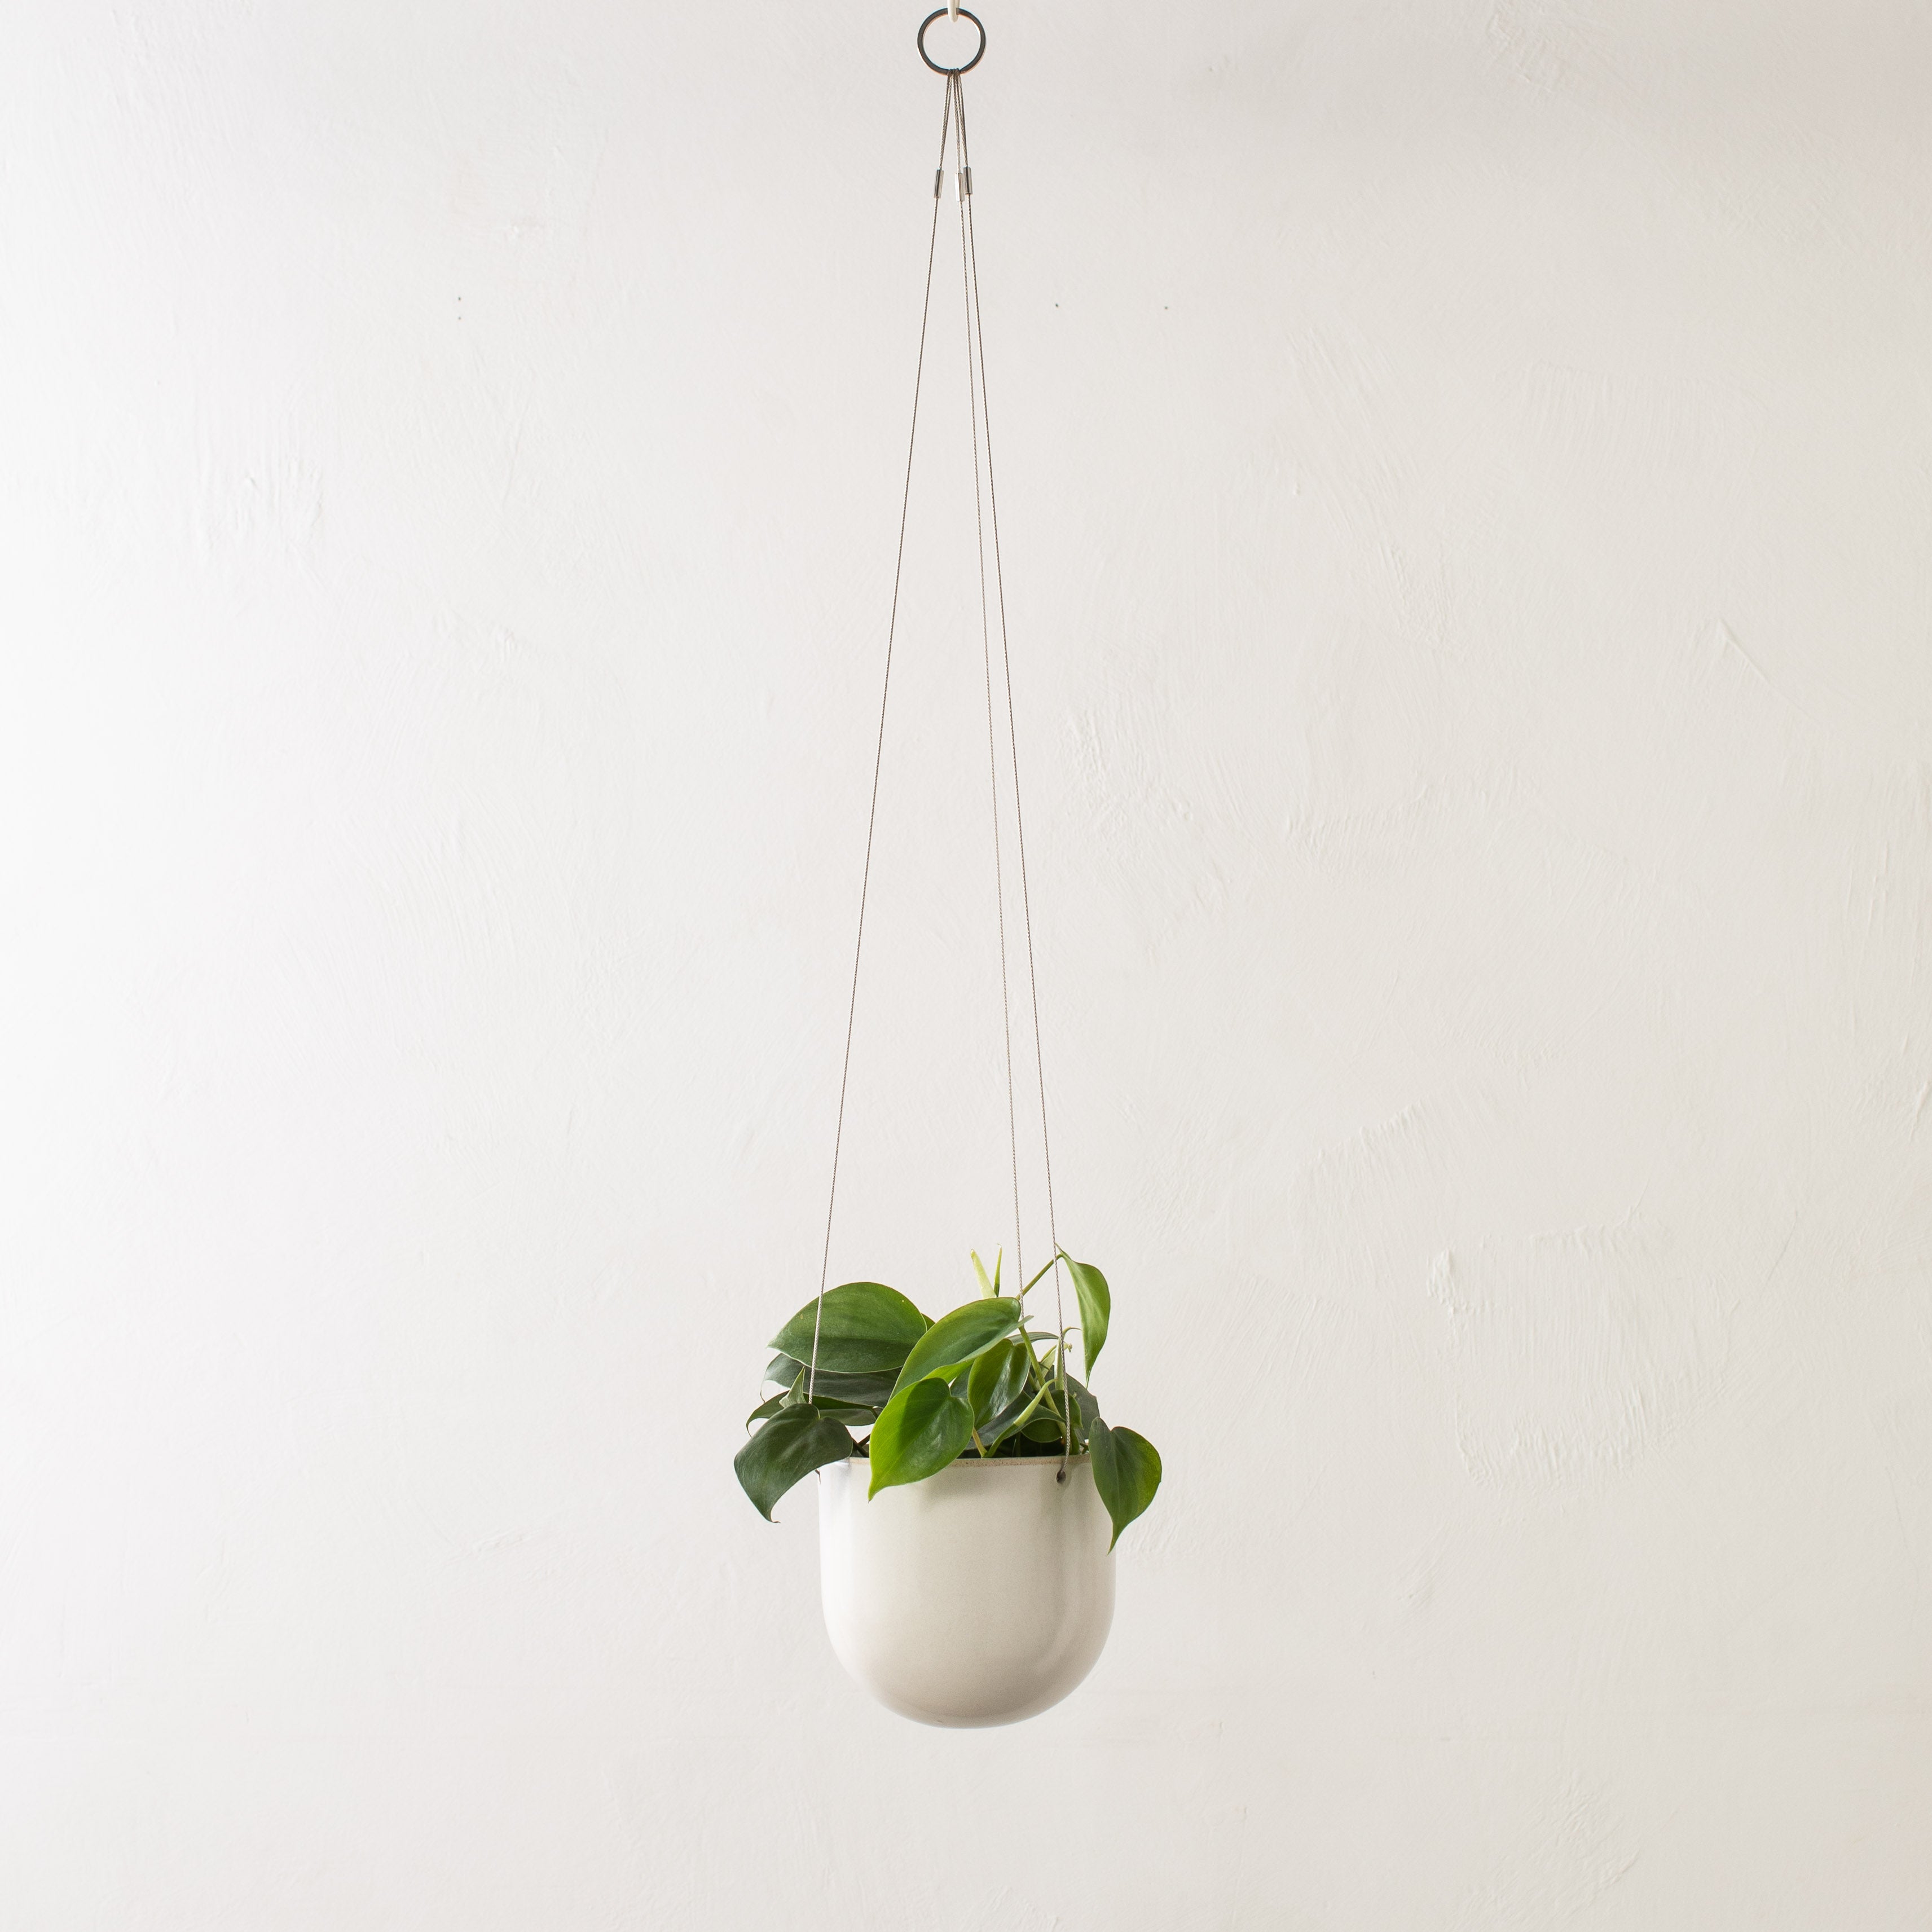 Seconds | Arched Hanging Planter No. 1 | Steel Cord